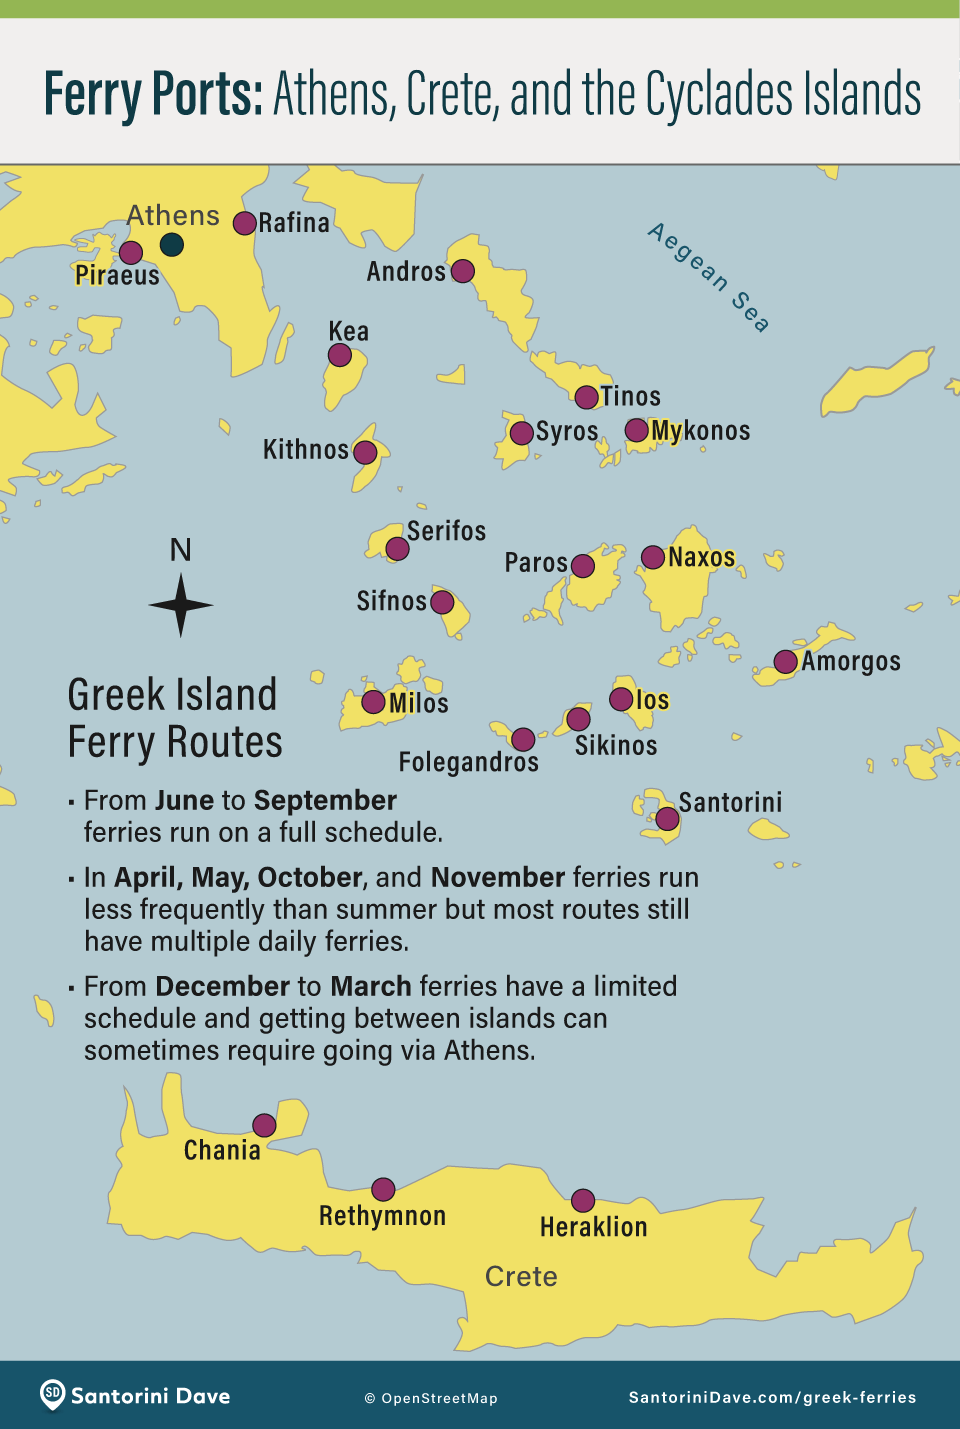 Map showing the ferry ports of the Cyclades islands.